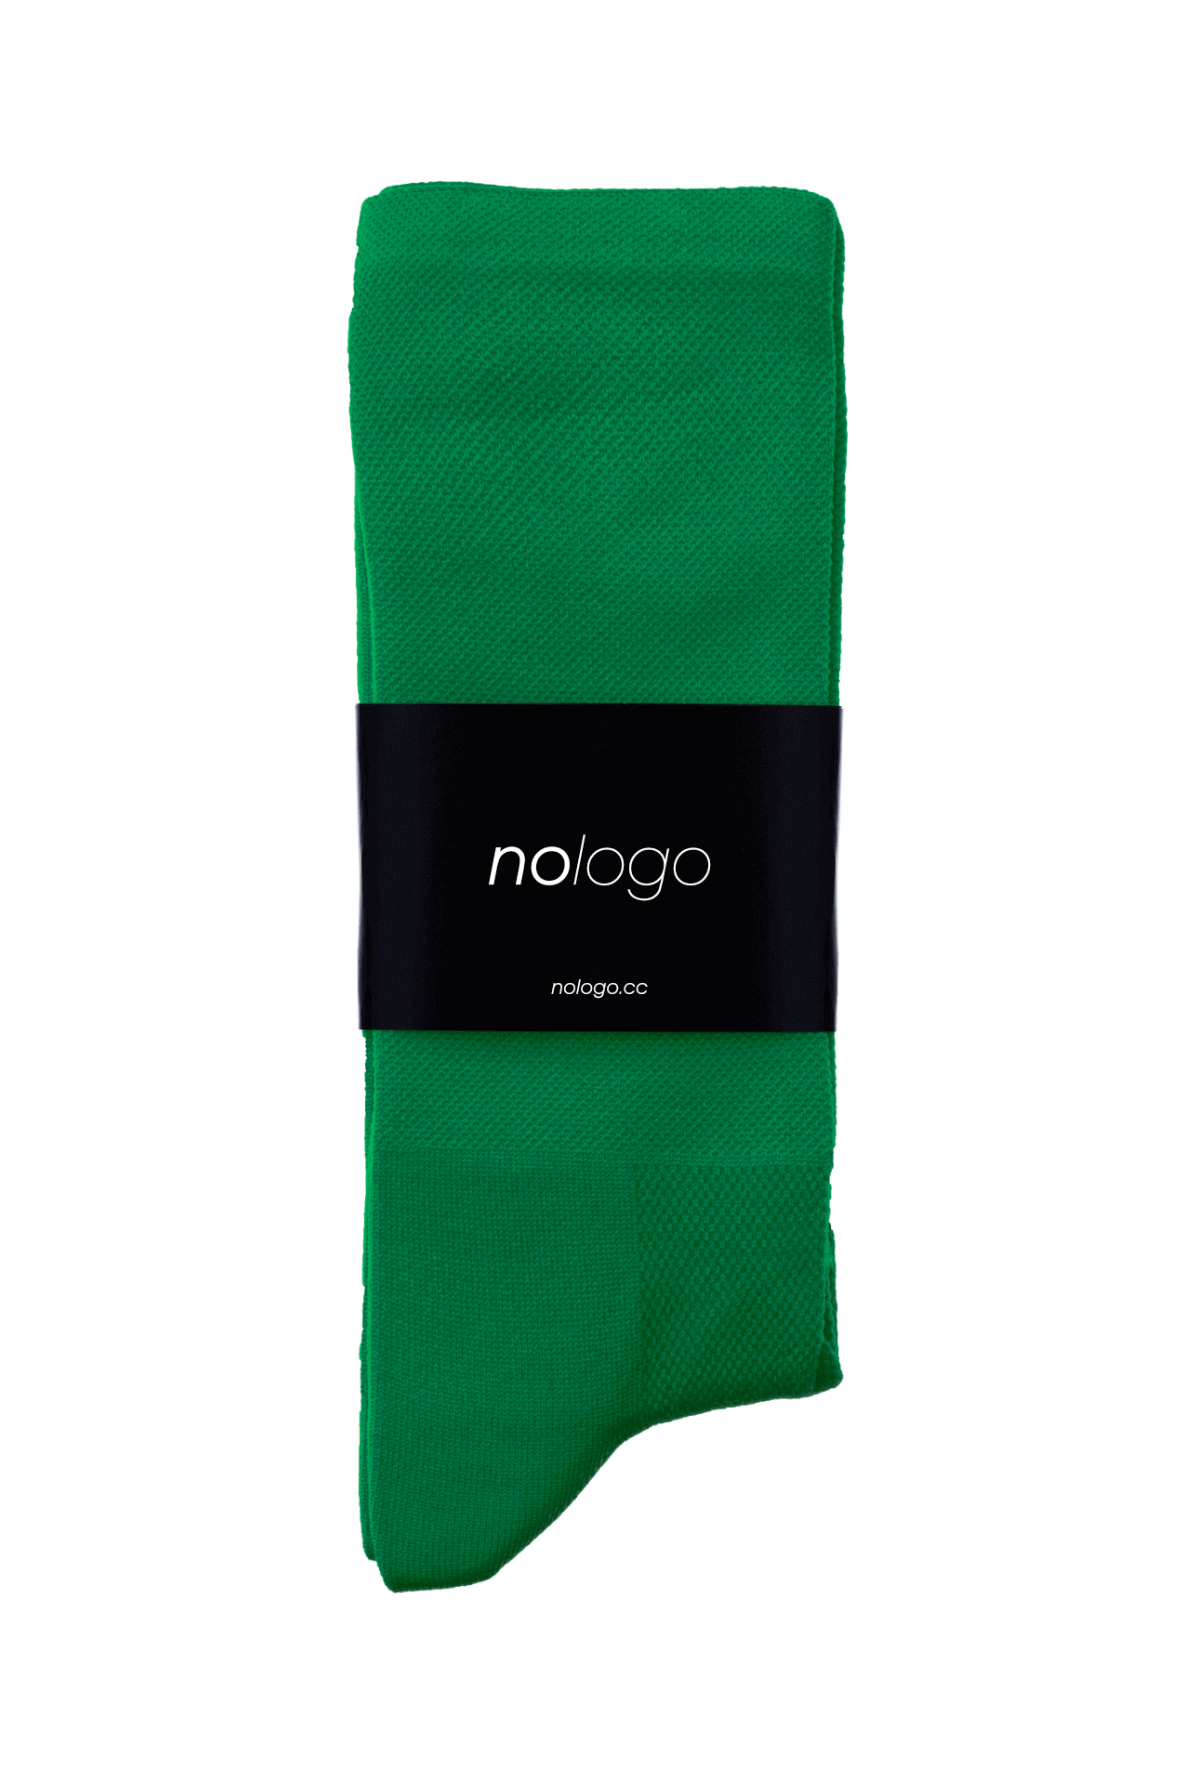 nologo - finest cycling socks made in the EU